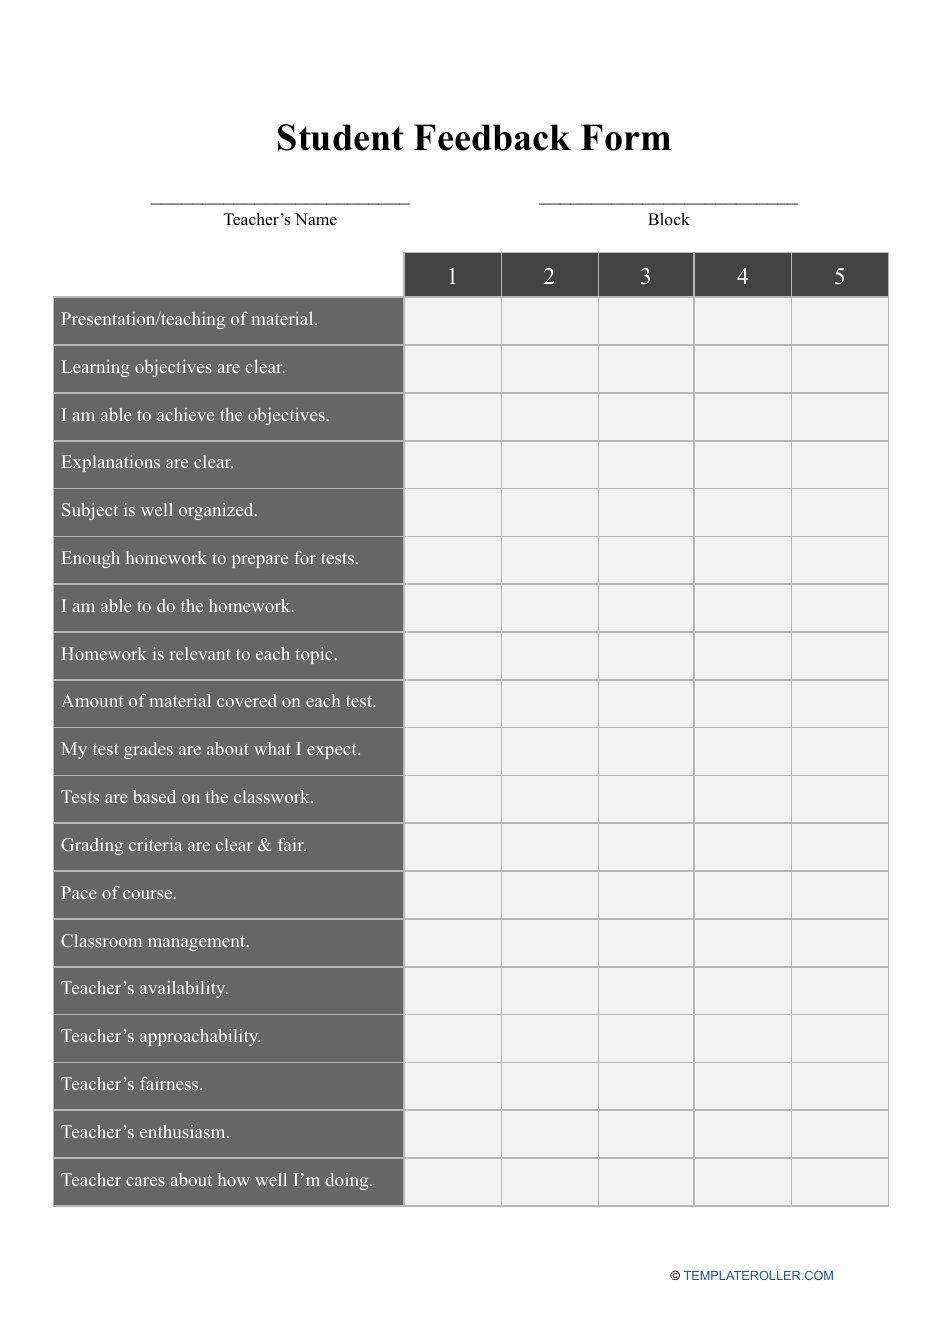 Student Feedback Form - Table, Page 1